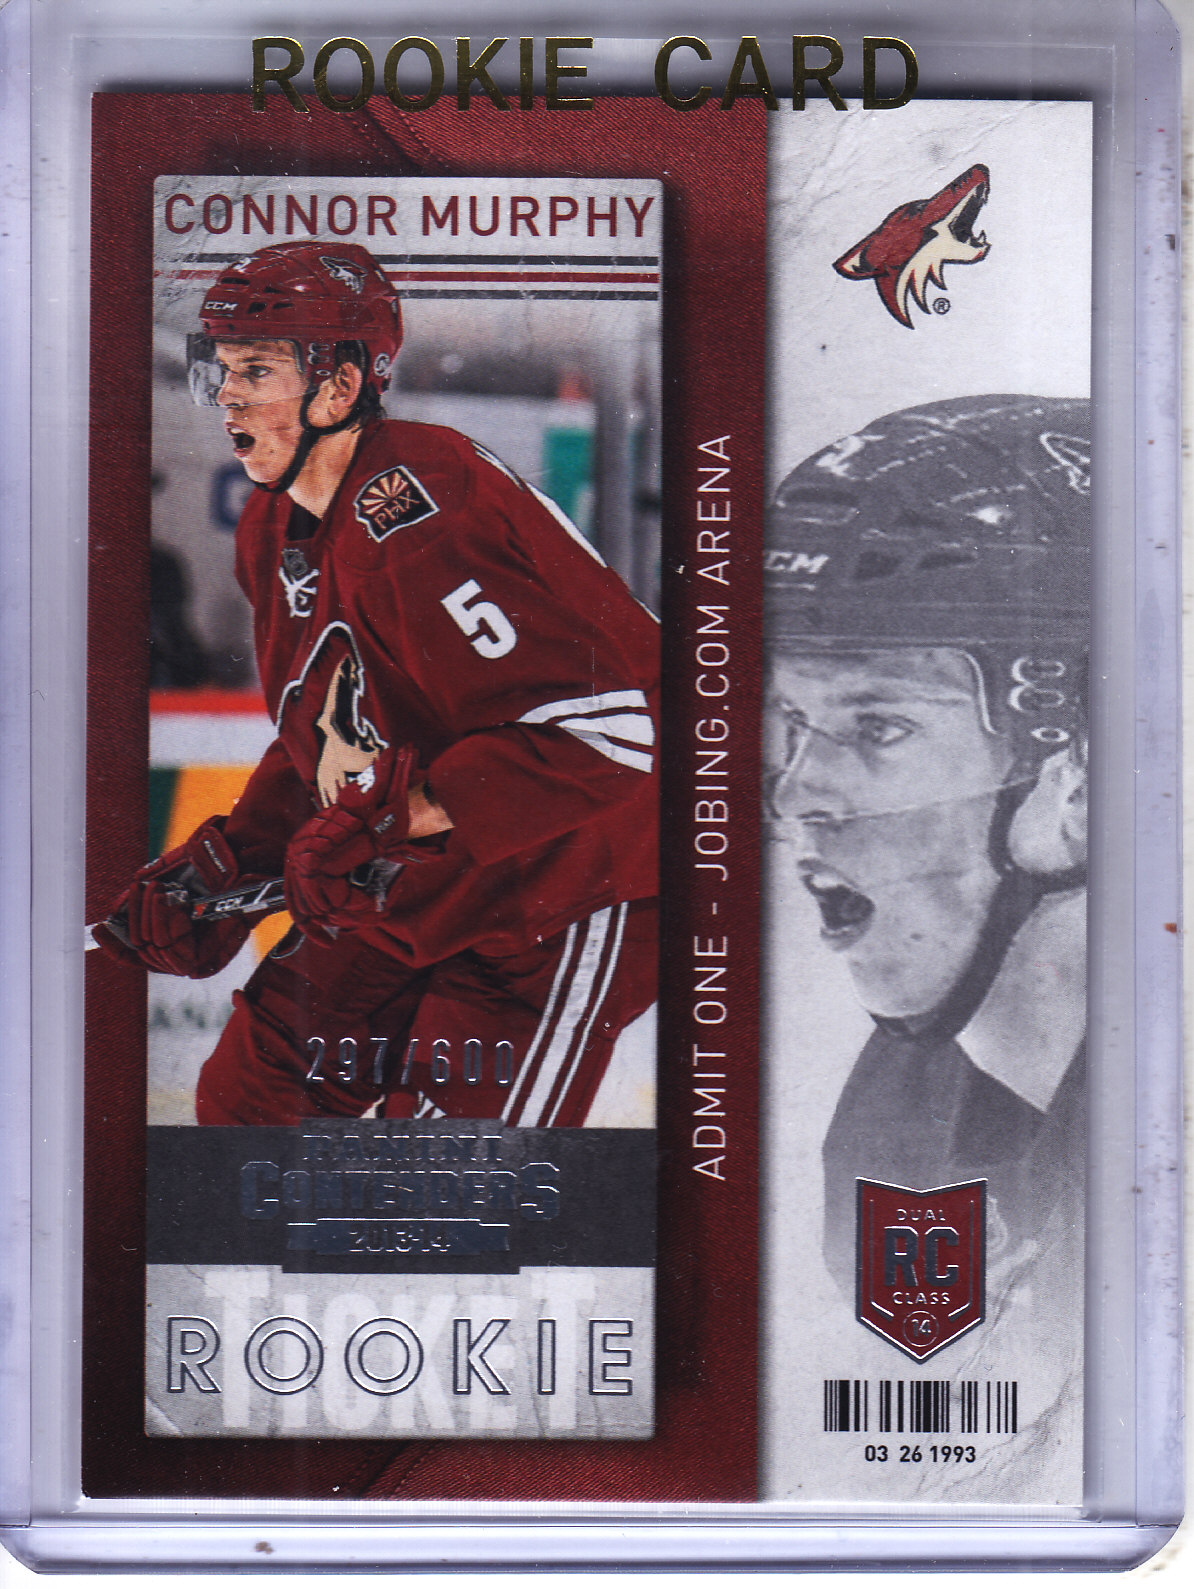  Connor Murphy player image